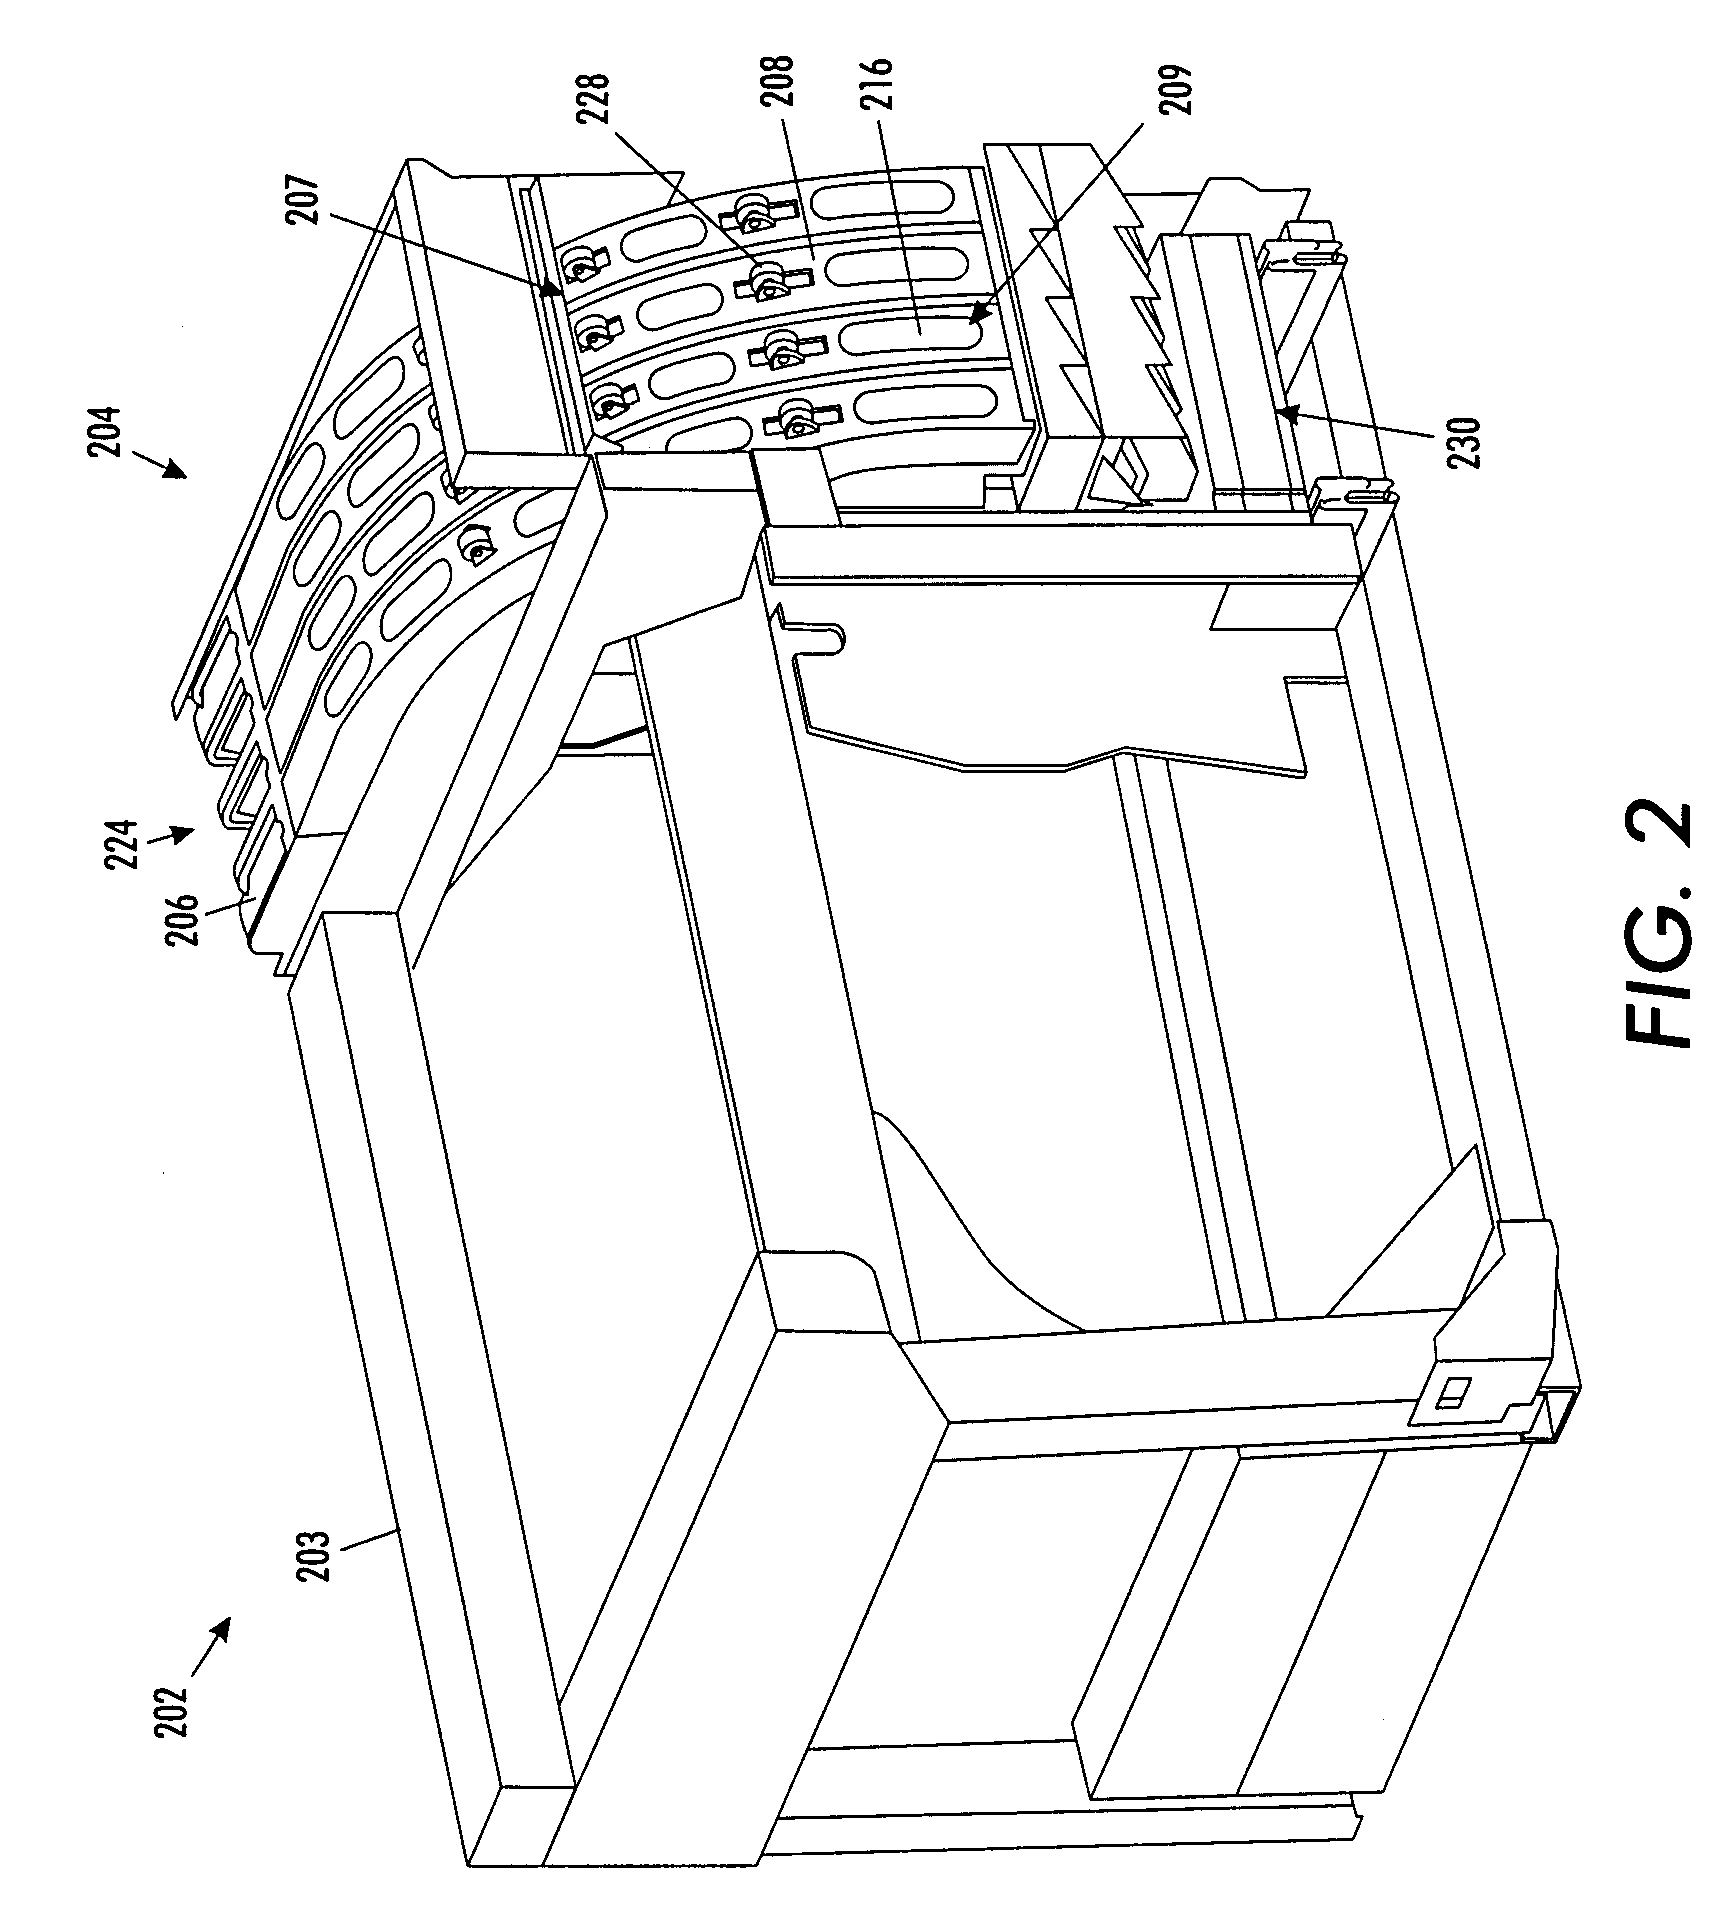 Transport system for solid ink for cooperation with melt head in a printer